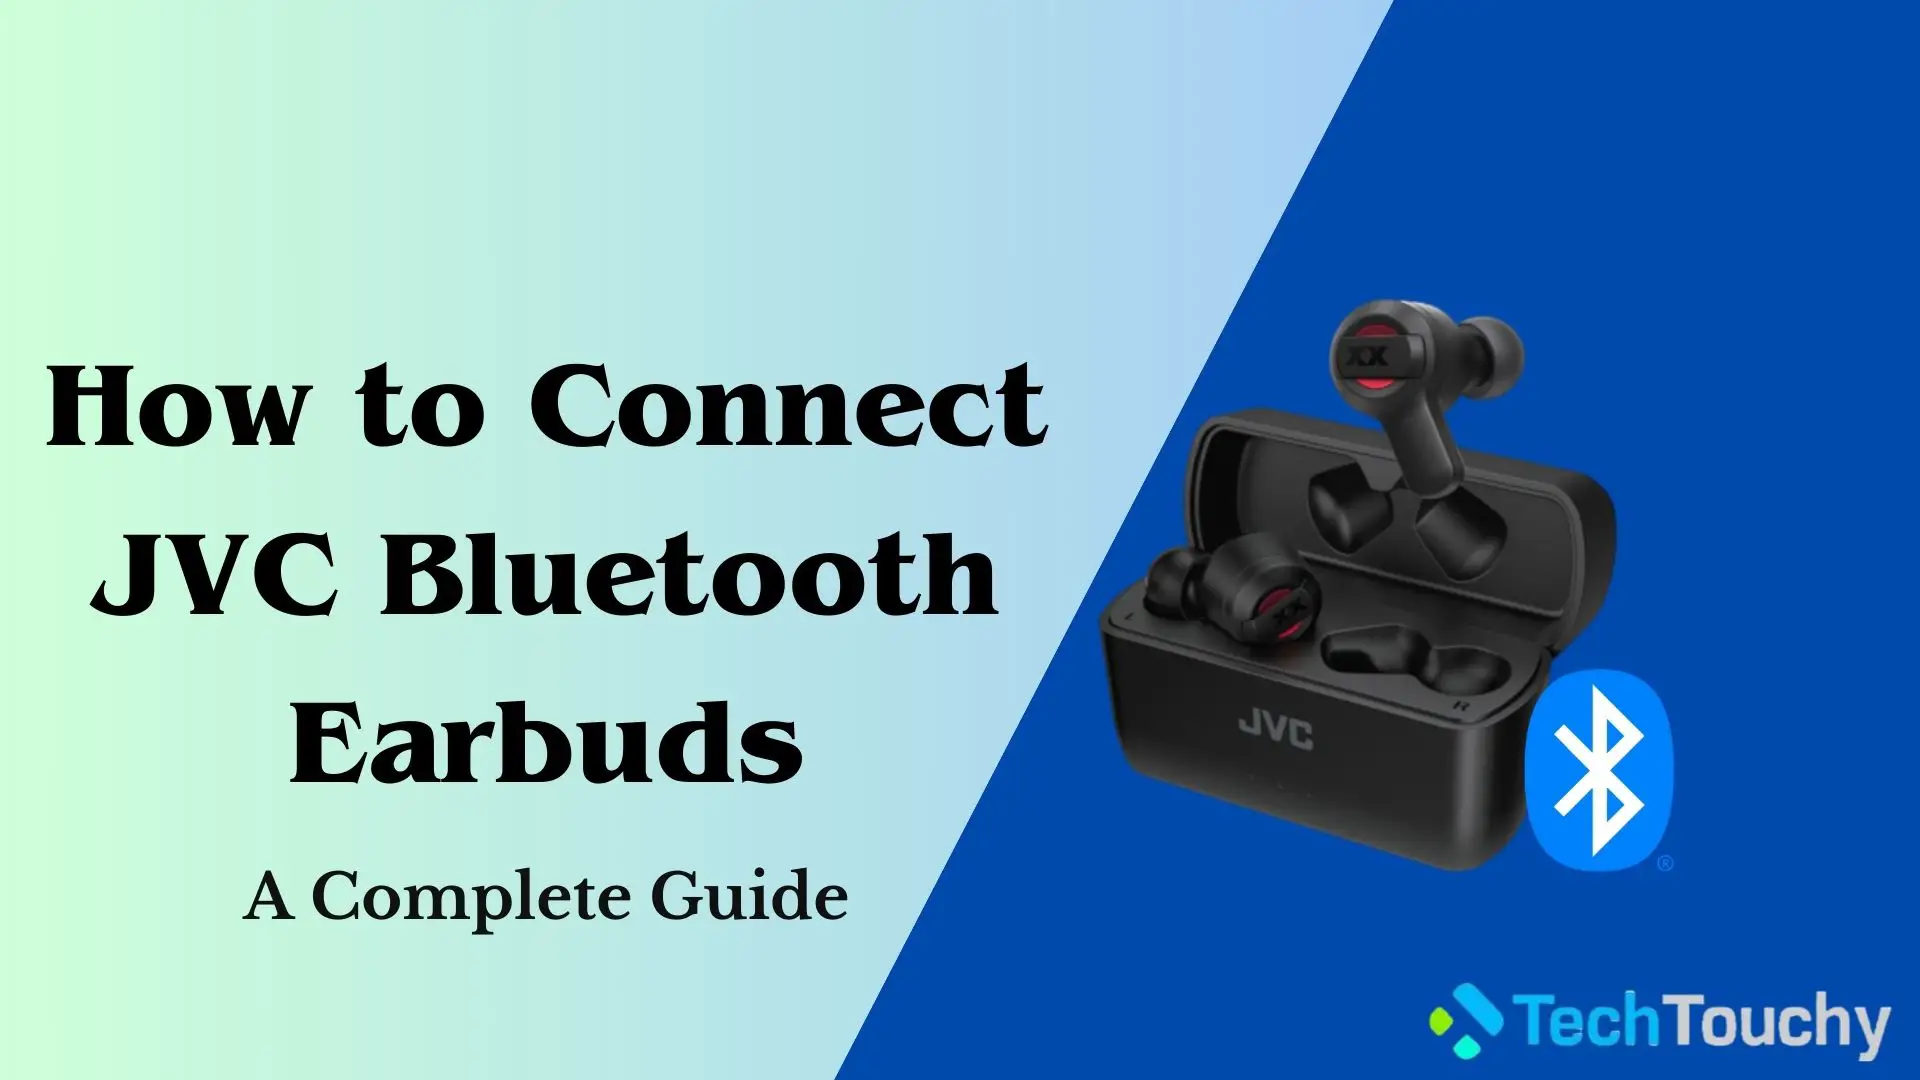 How to Connect JVC Bluetooth Earbuds